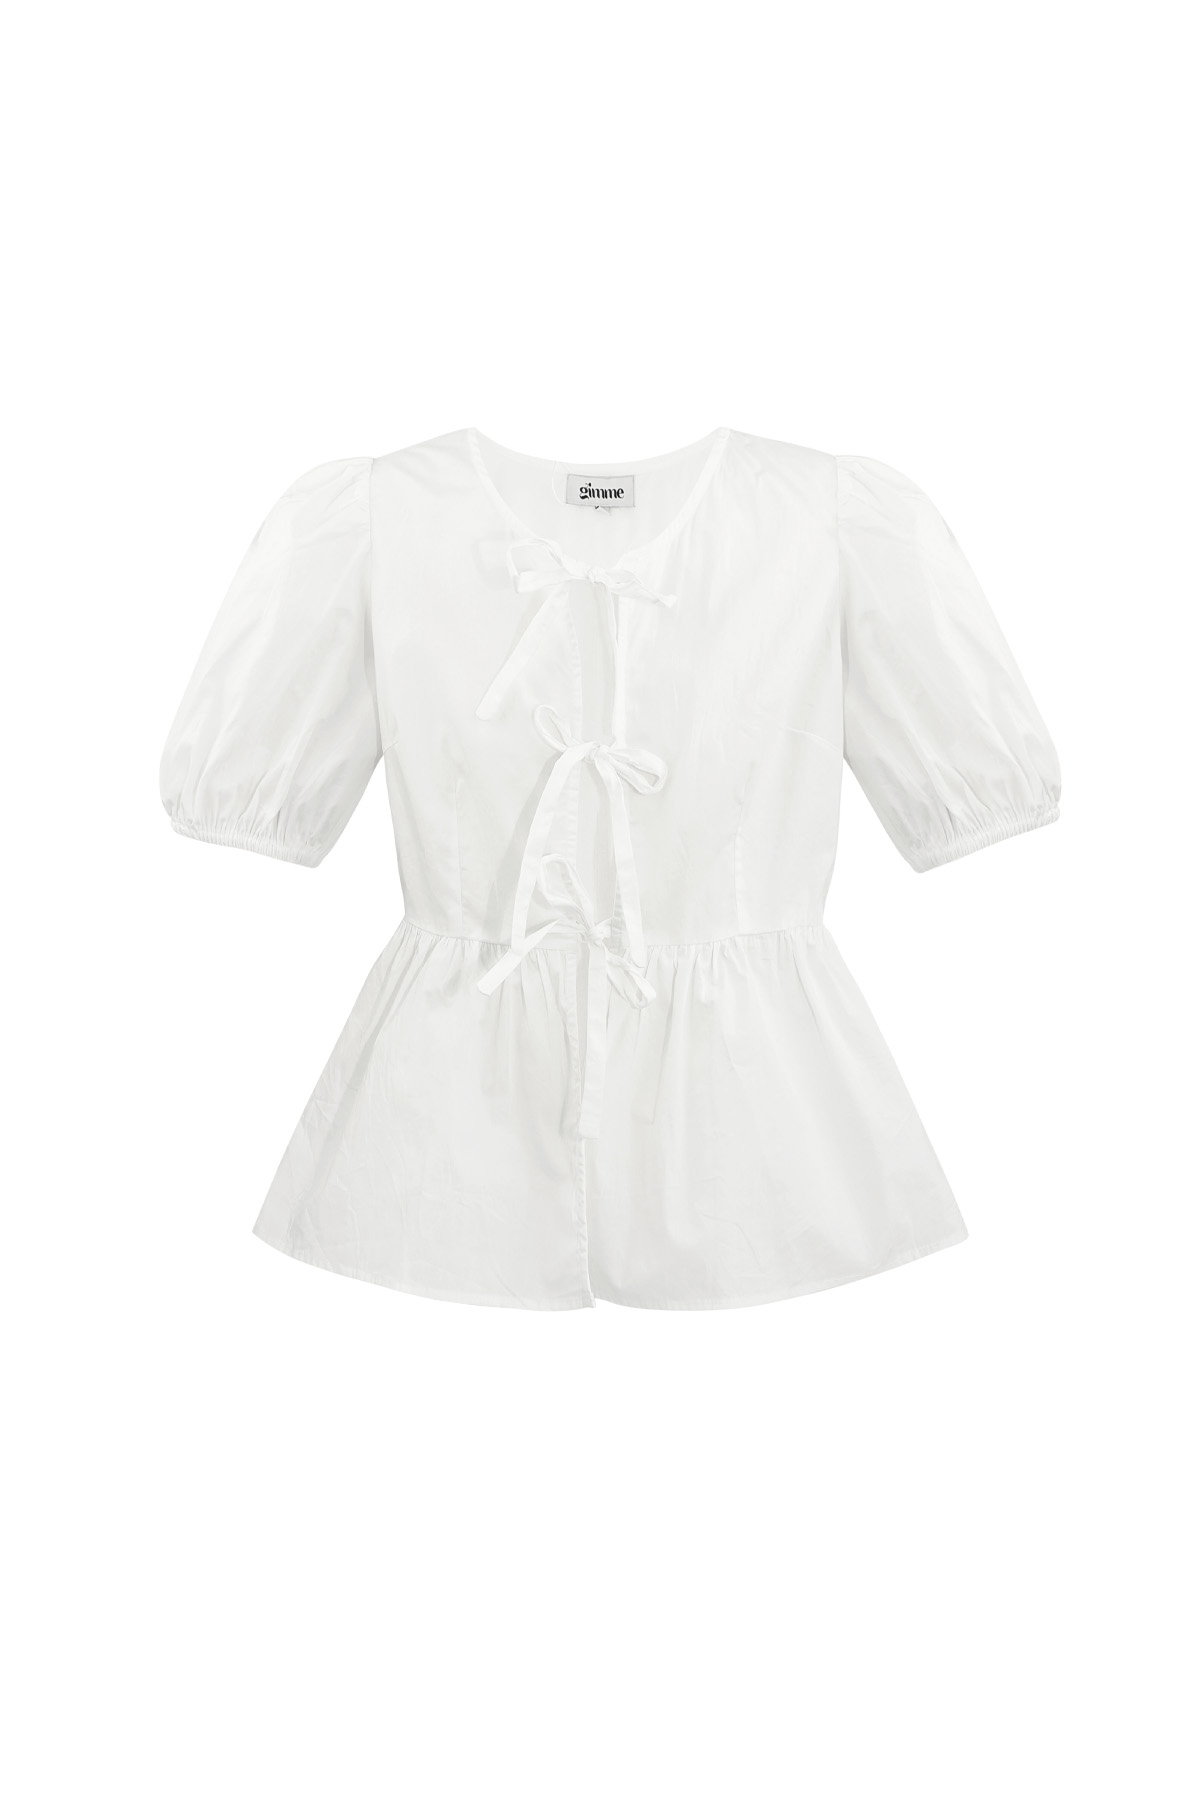 Must-have peplum blouse with bows - white